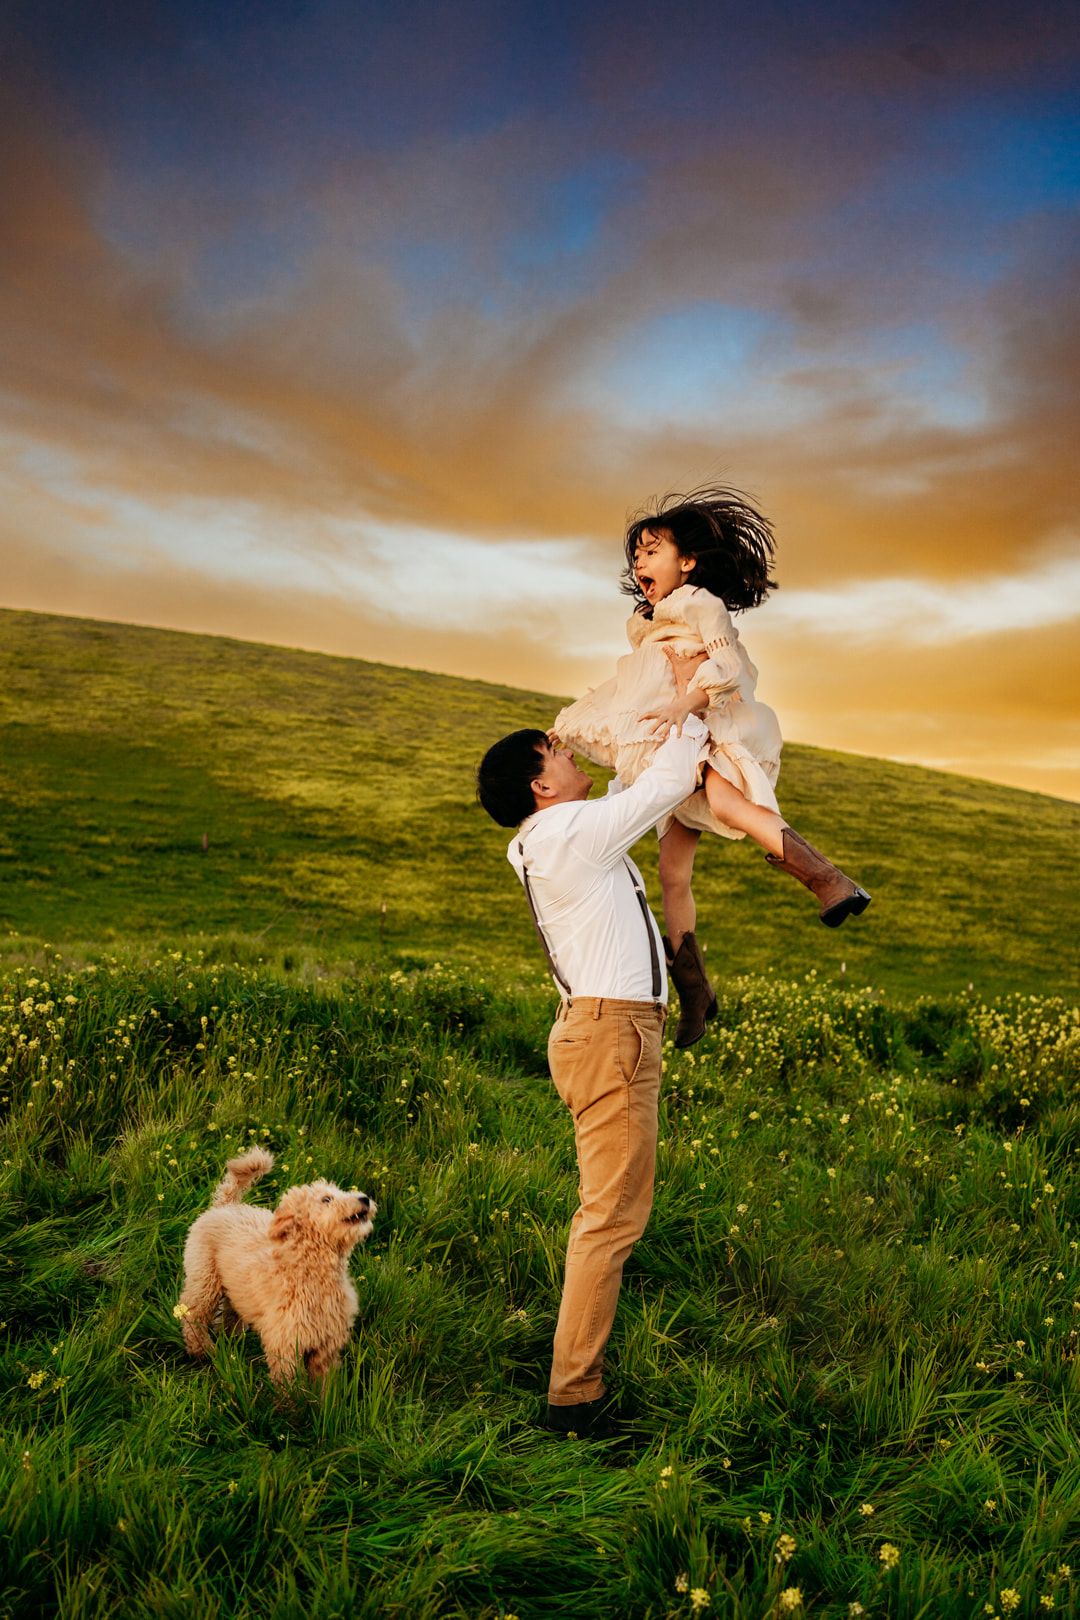 A father throws his young daughter in the air during their photoshoot in Pleasanton CA.